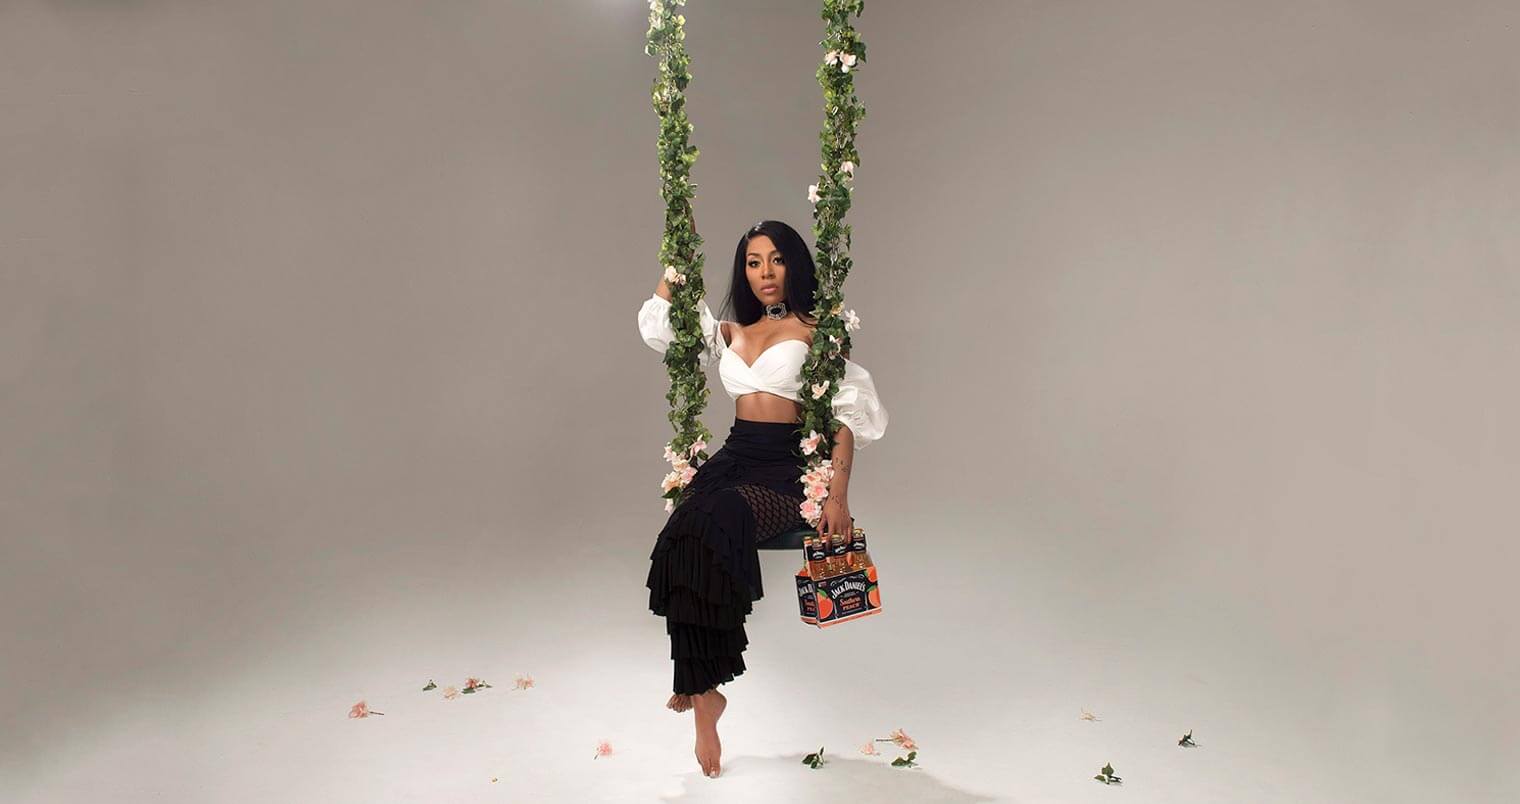 K. Michelle Teams with Jack Daniel's to Launch Southern Peach, featured image